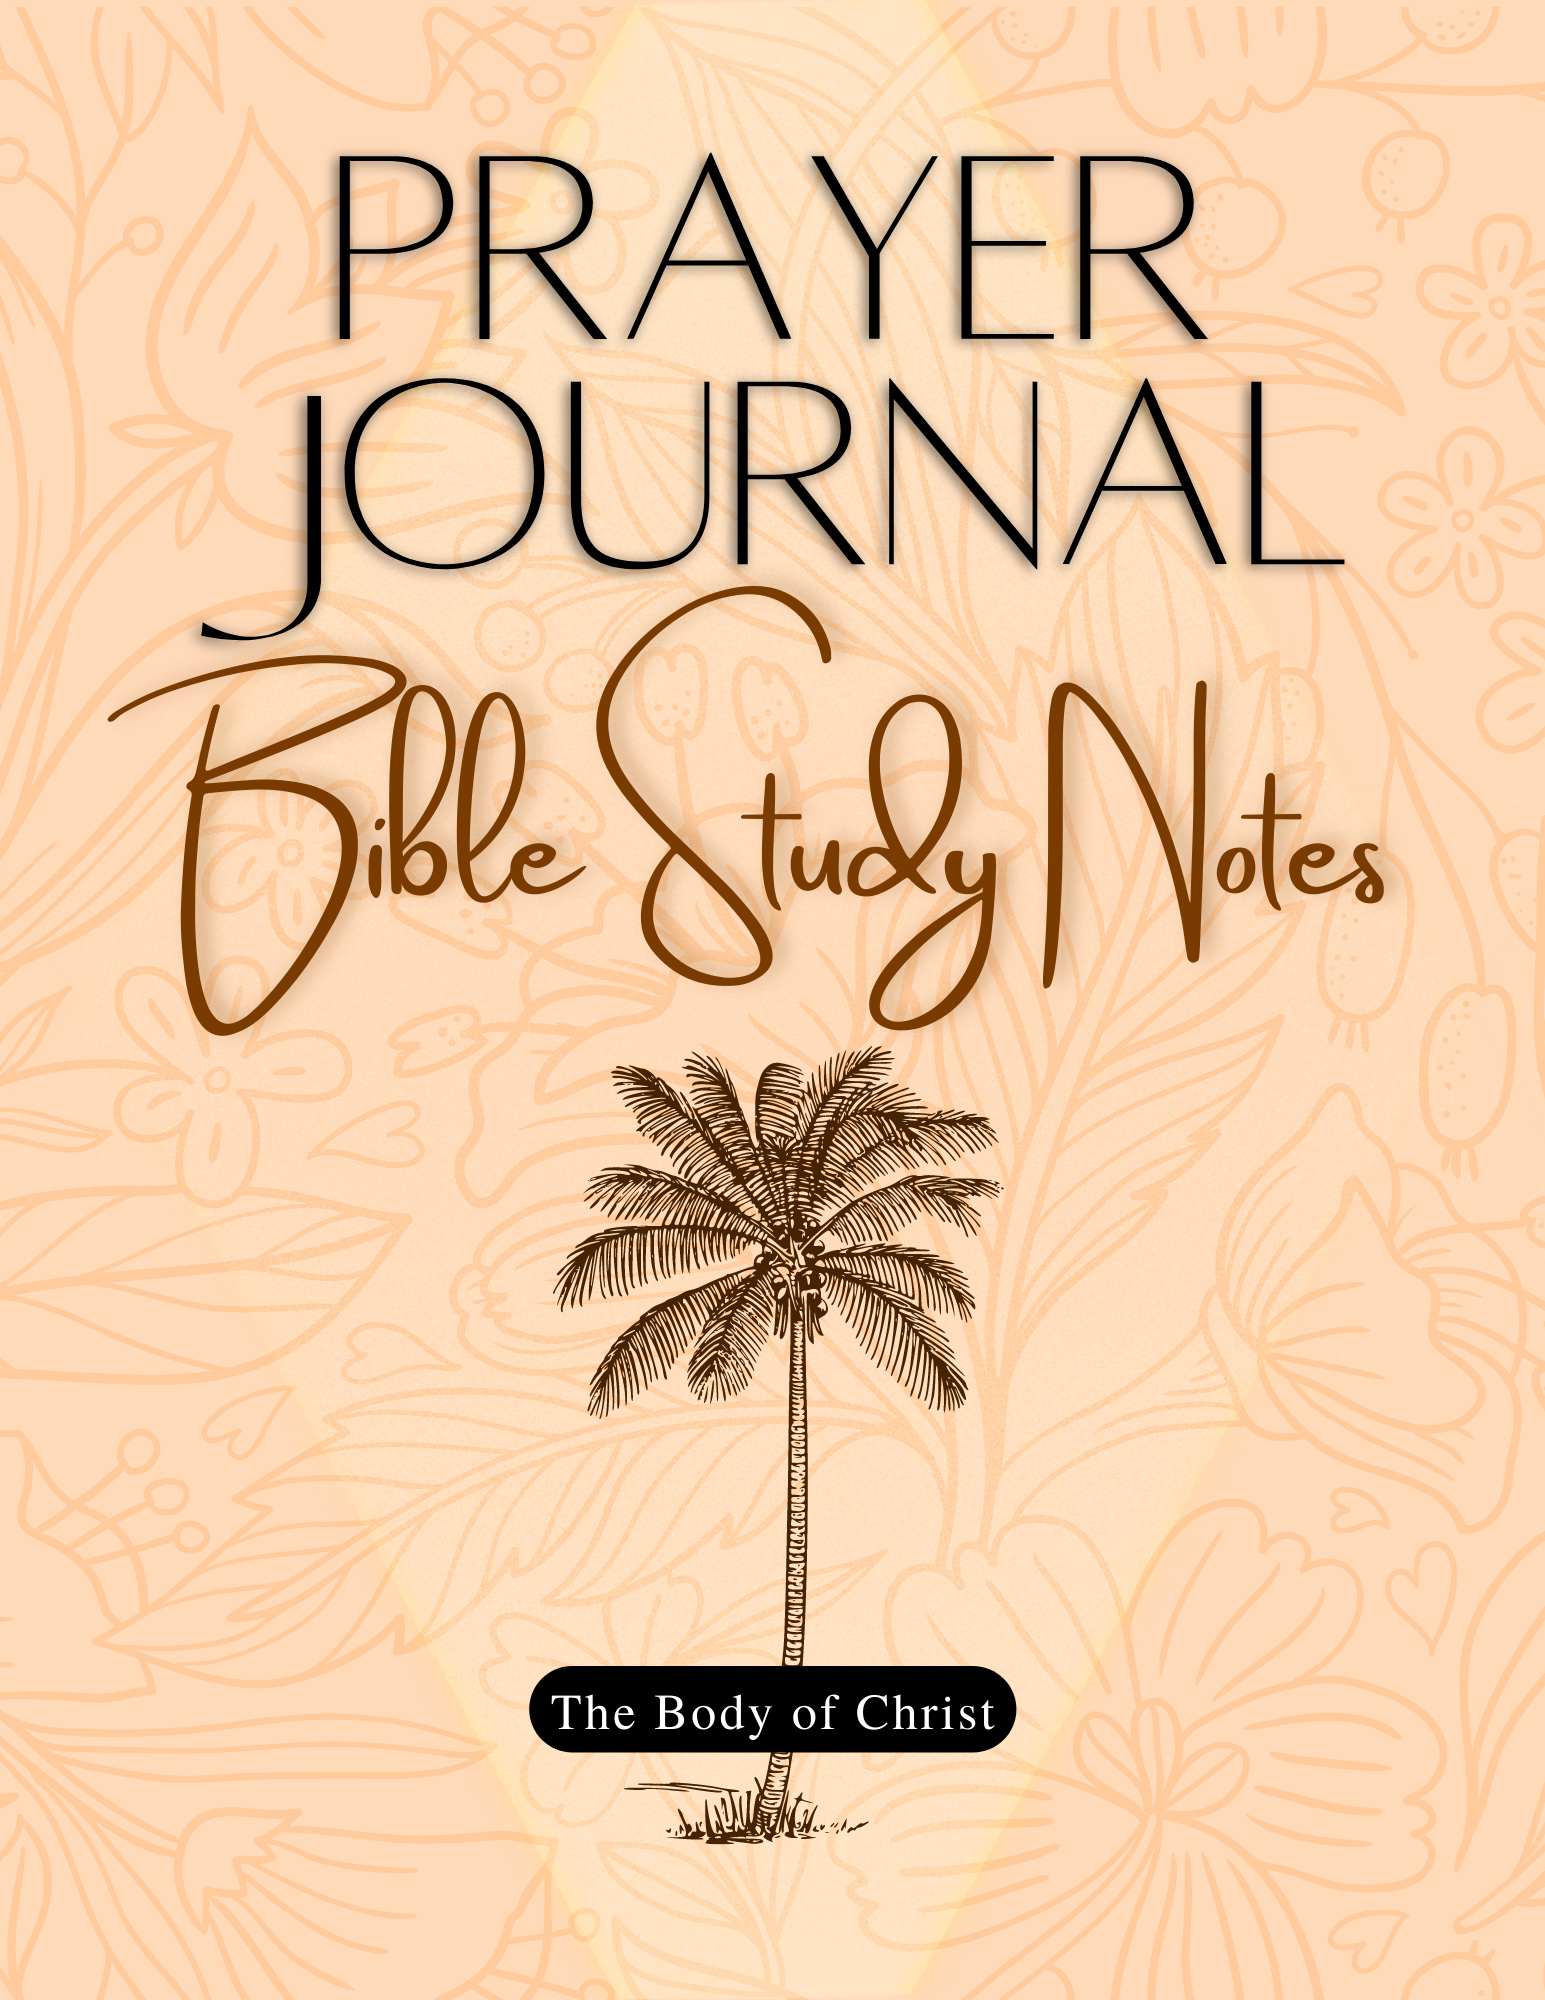 Prayer Journal Bible Study Notes: The Body of Christ